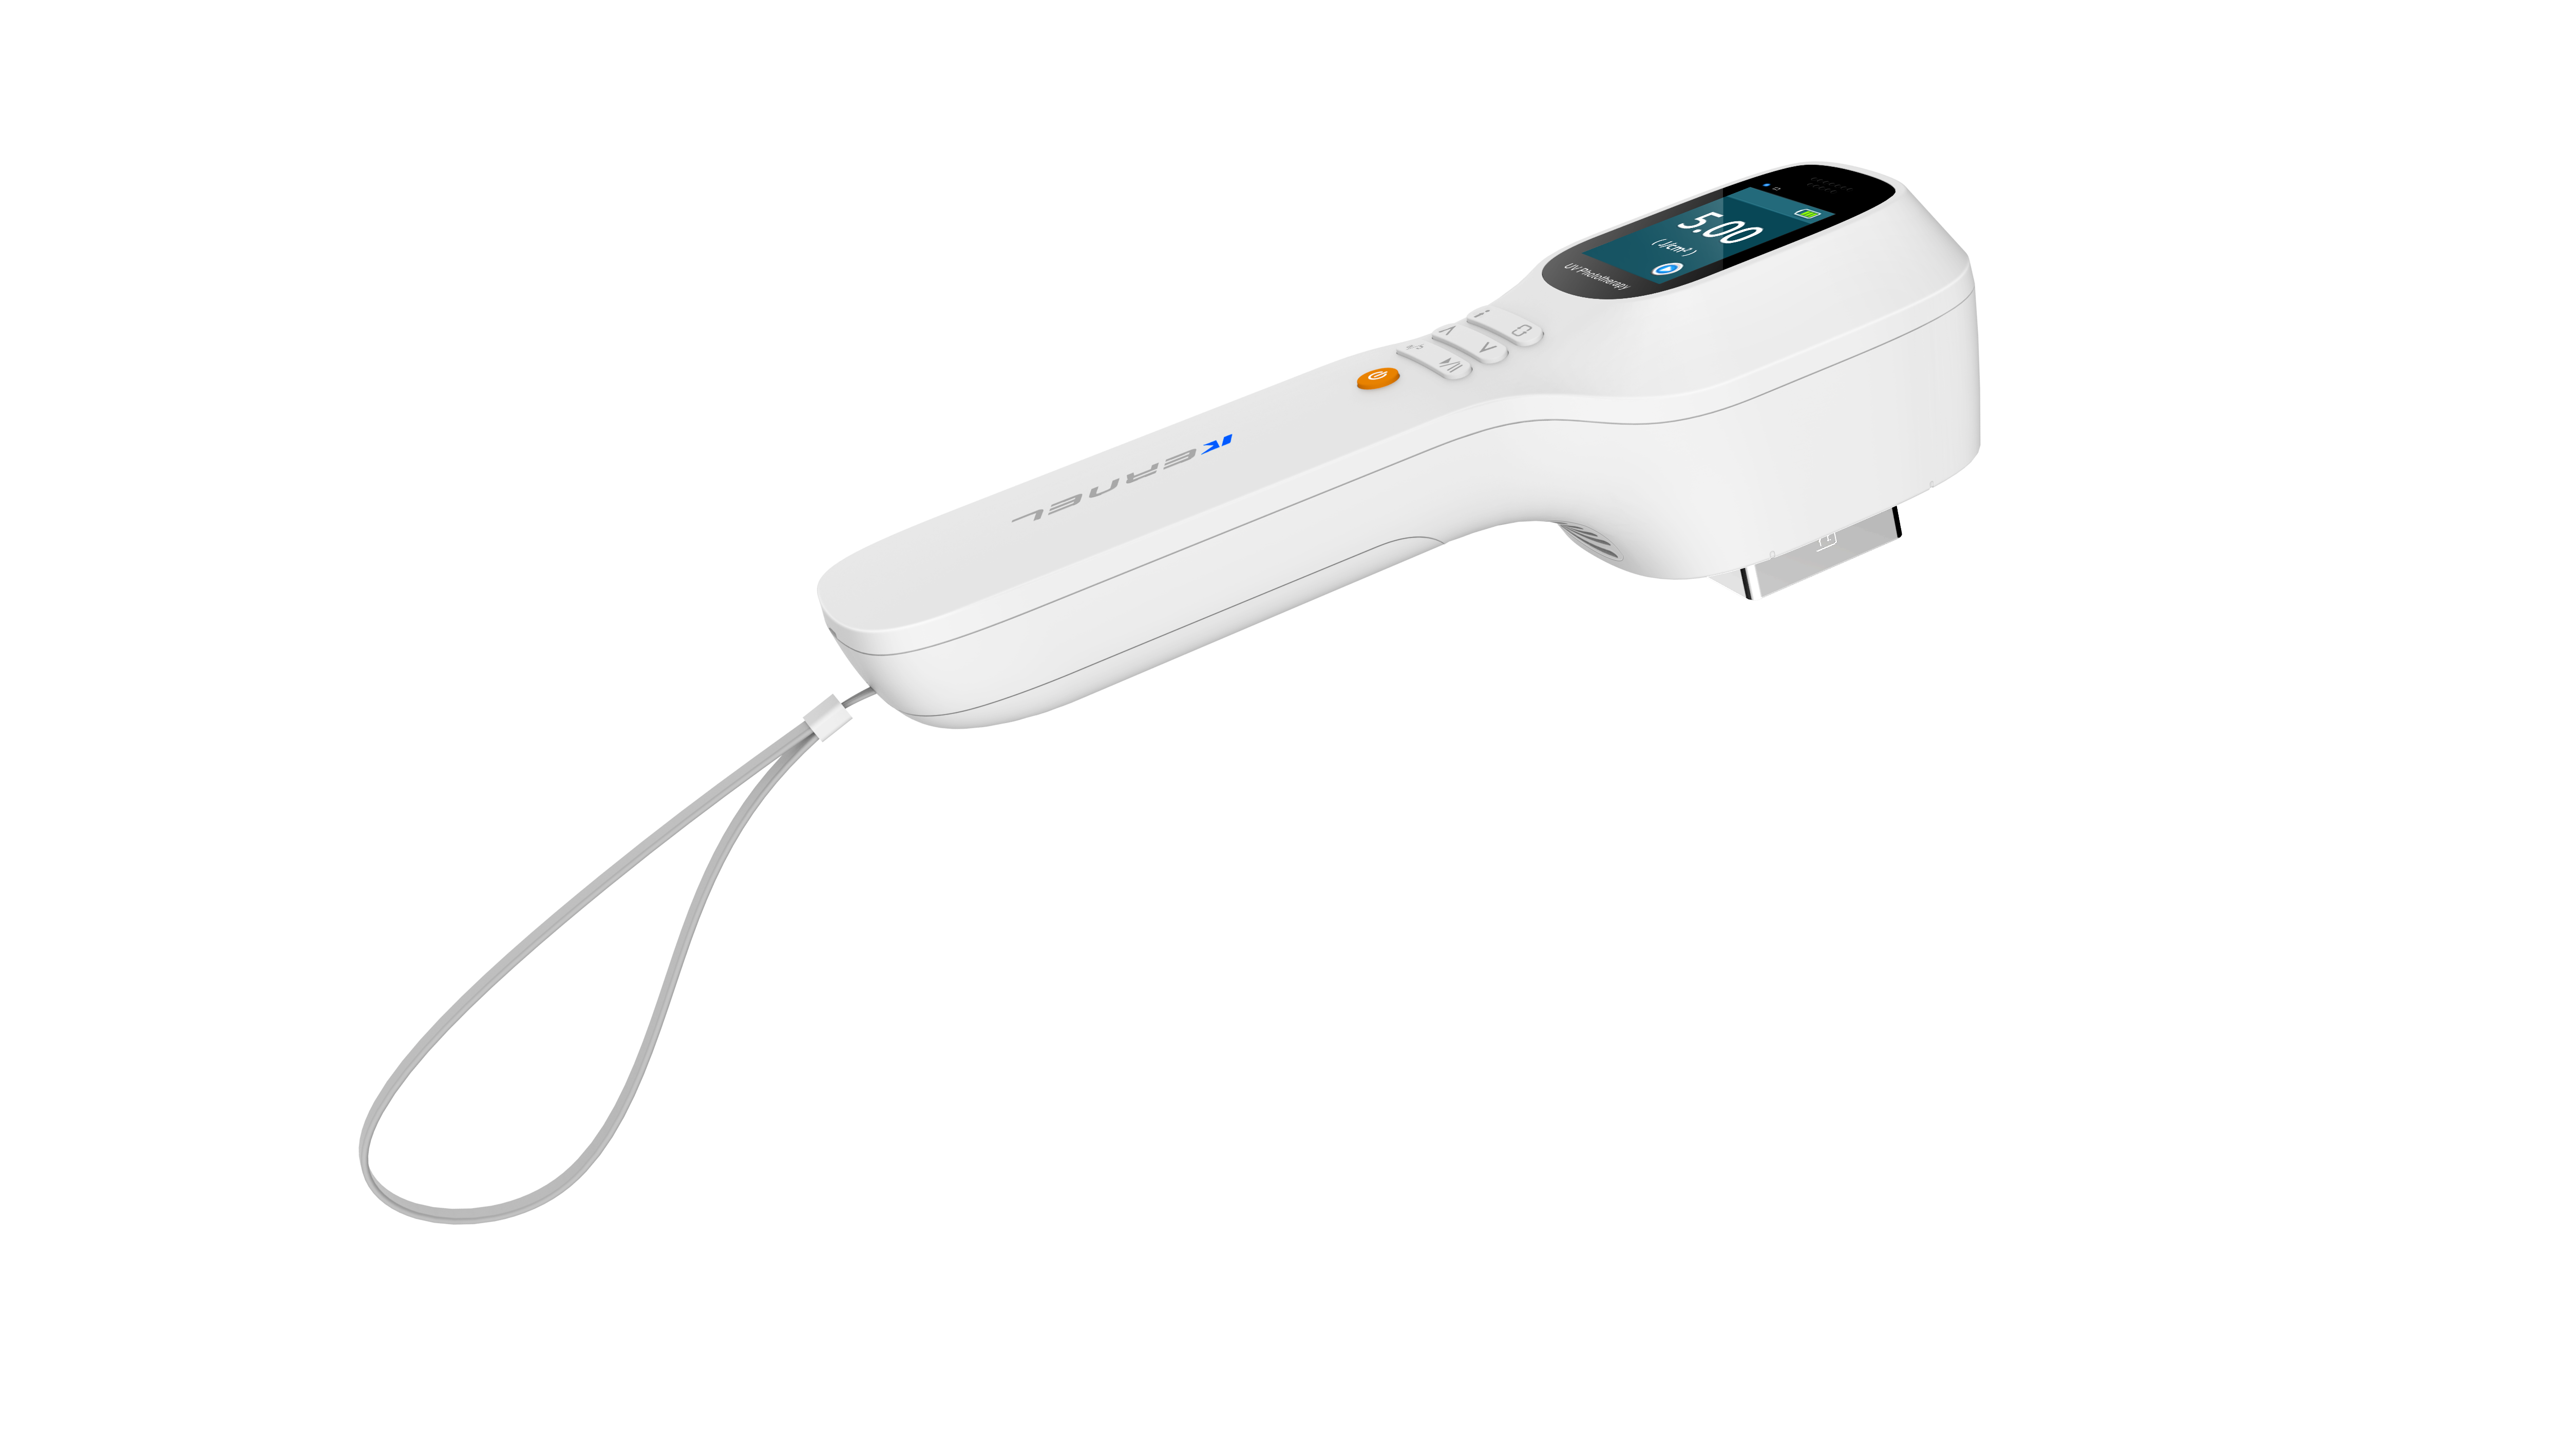 KN-5000H Portable LED Excimer 308nm laser for vitiligo psoriasis Manufacturers, KN-5000H Portable LED Excimer 308nm laser for vitiligo psoriasis Factory, Supply KN-5000H Portable LED Excimer 308nm laser for vitiligo psoriasis